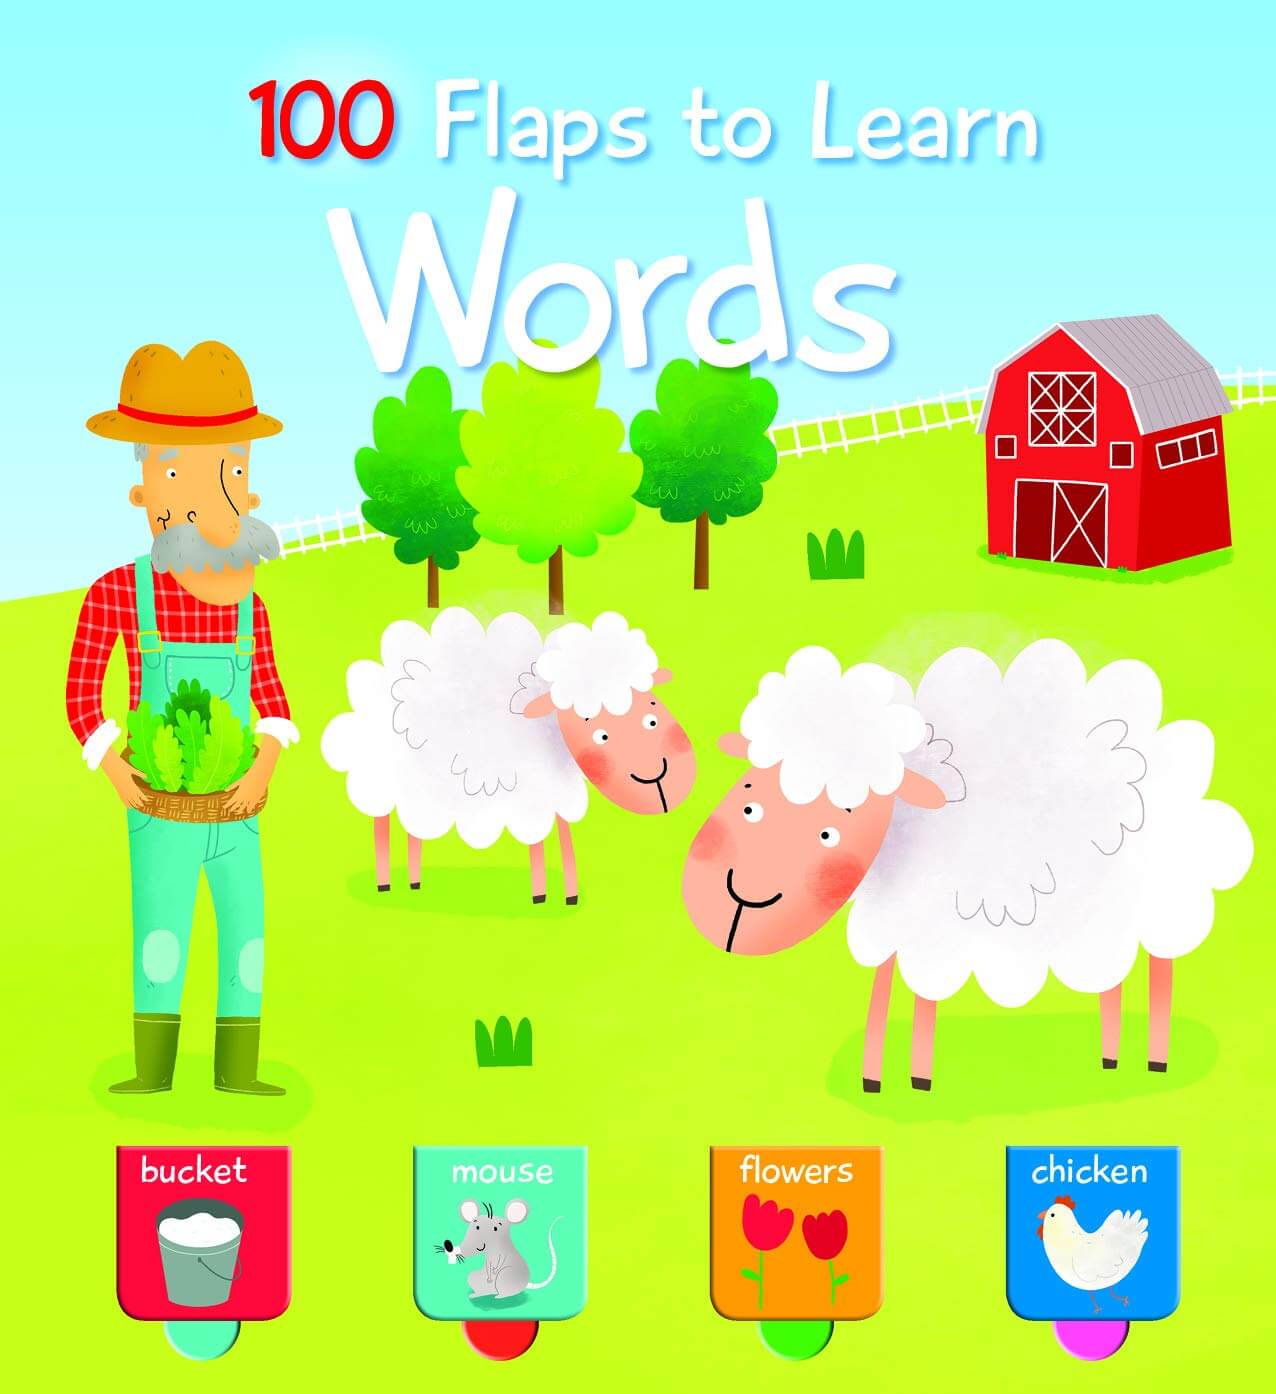 100 Flaps to Learn: Words